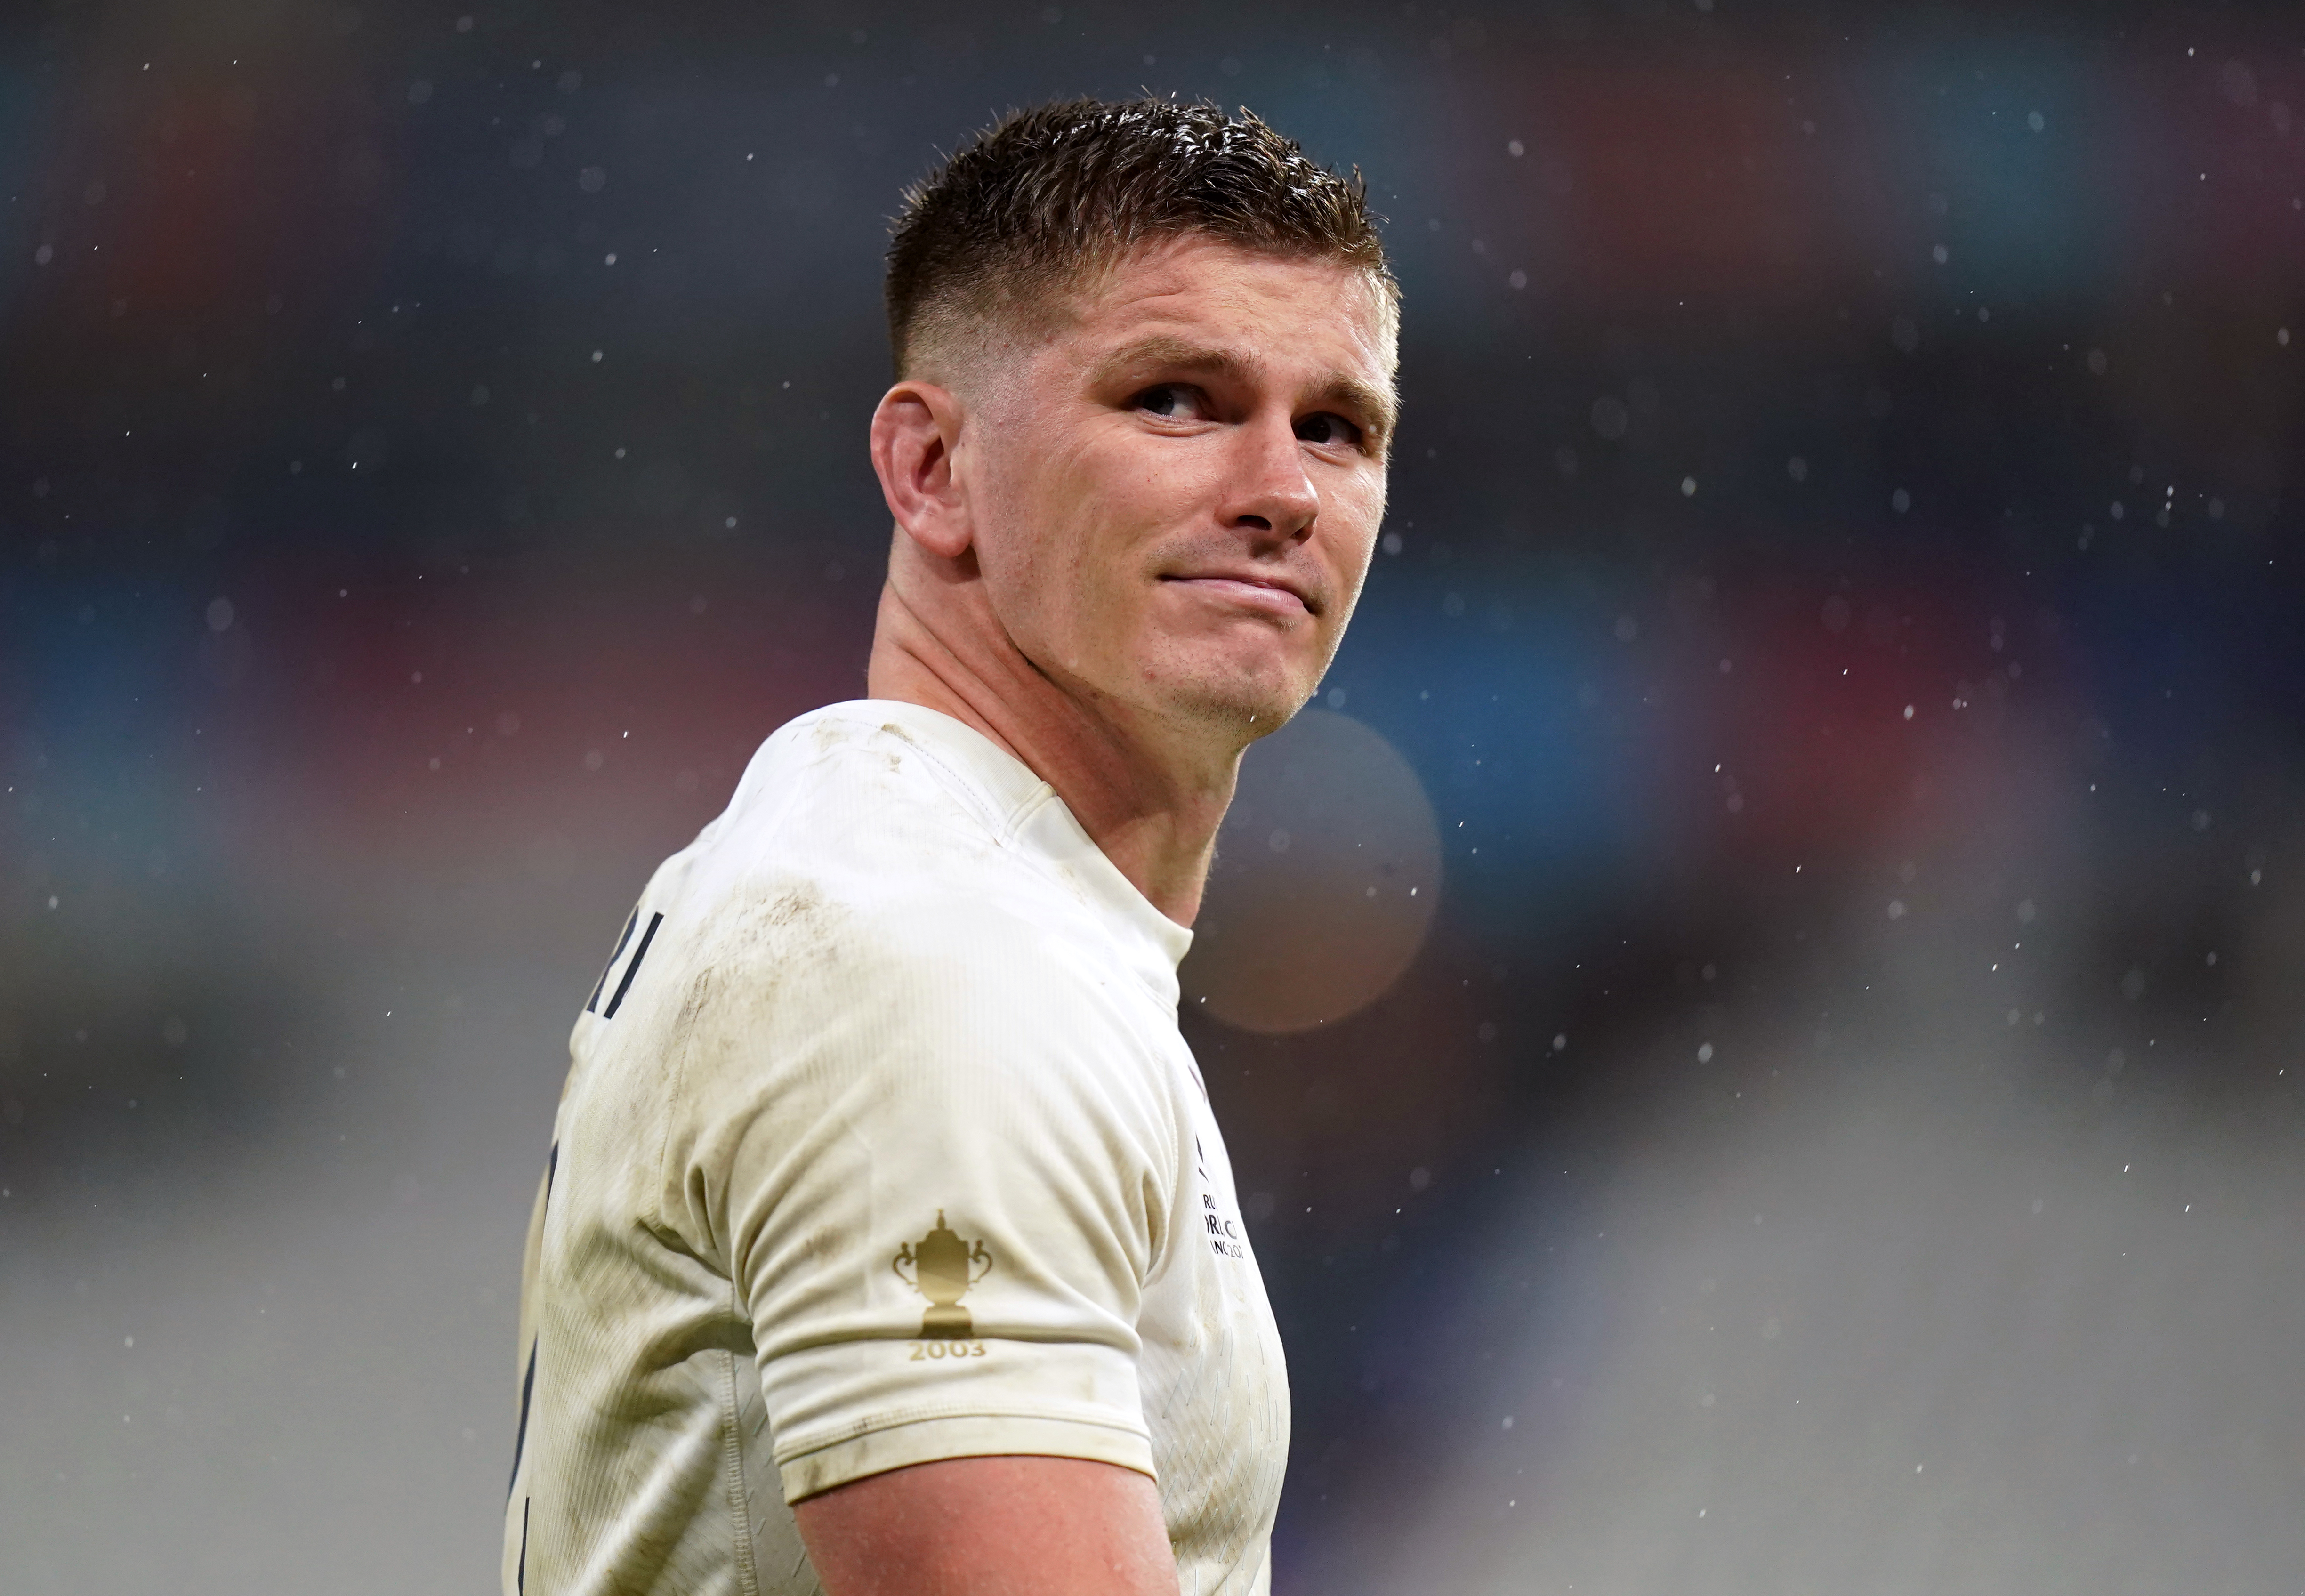 Owen Farrell may already have played his final game for England